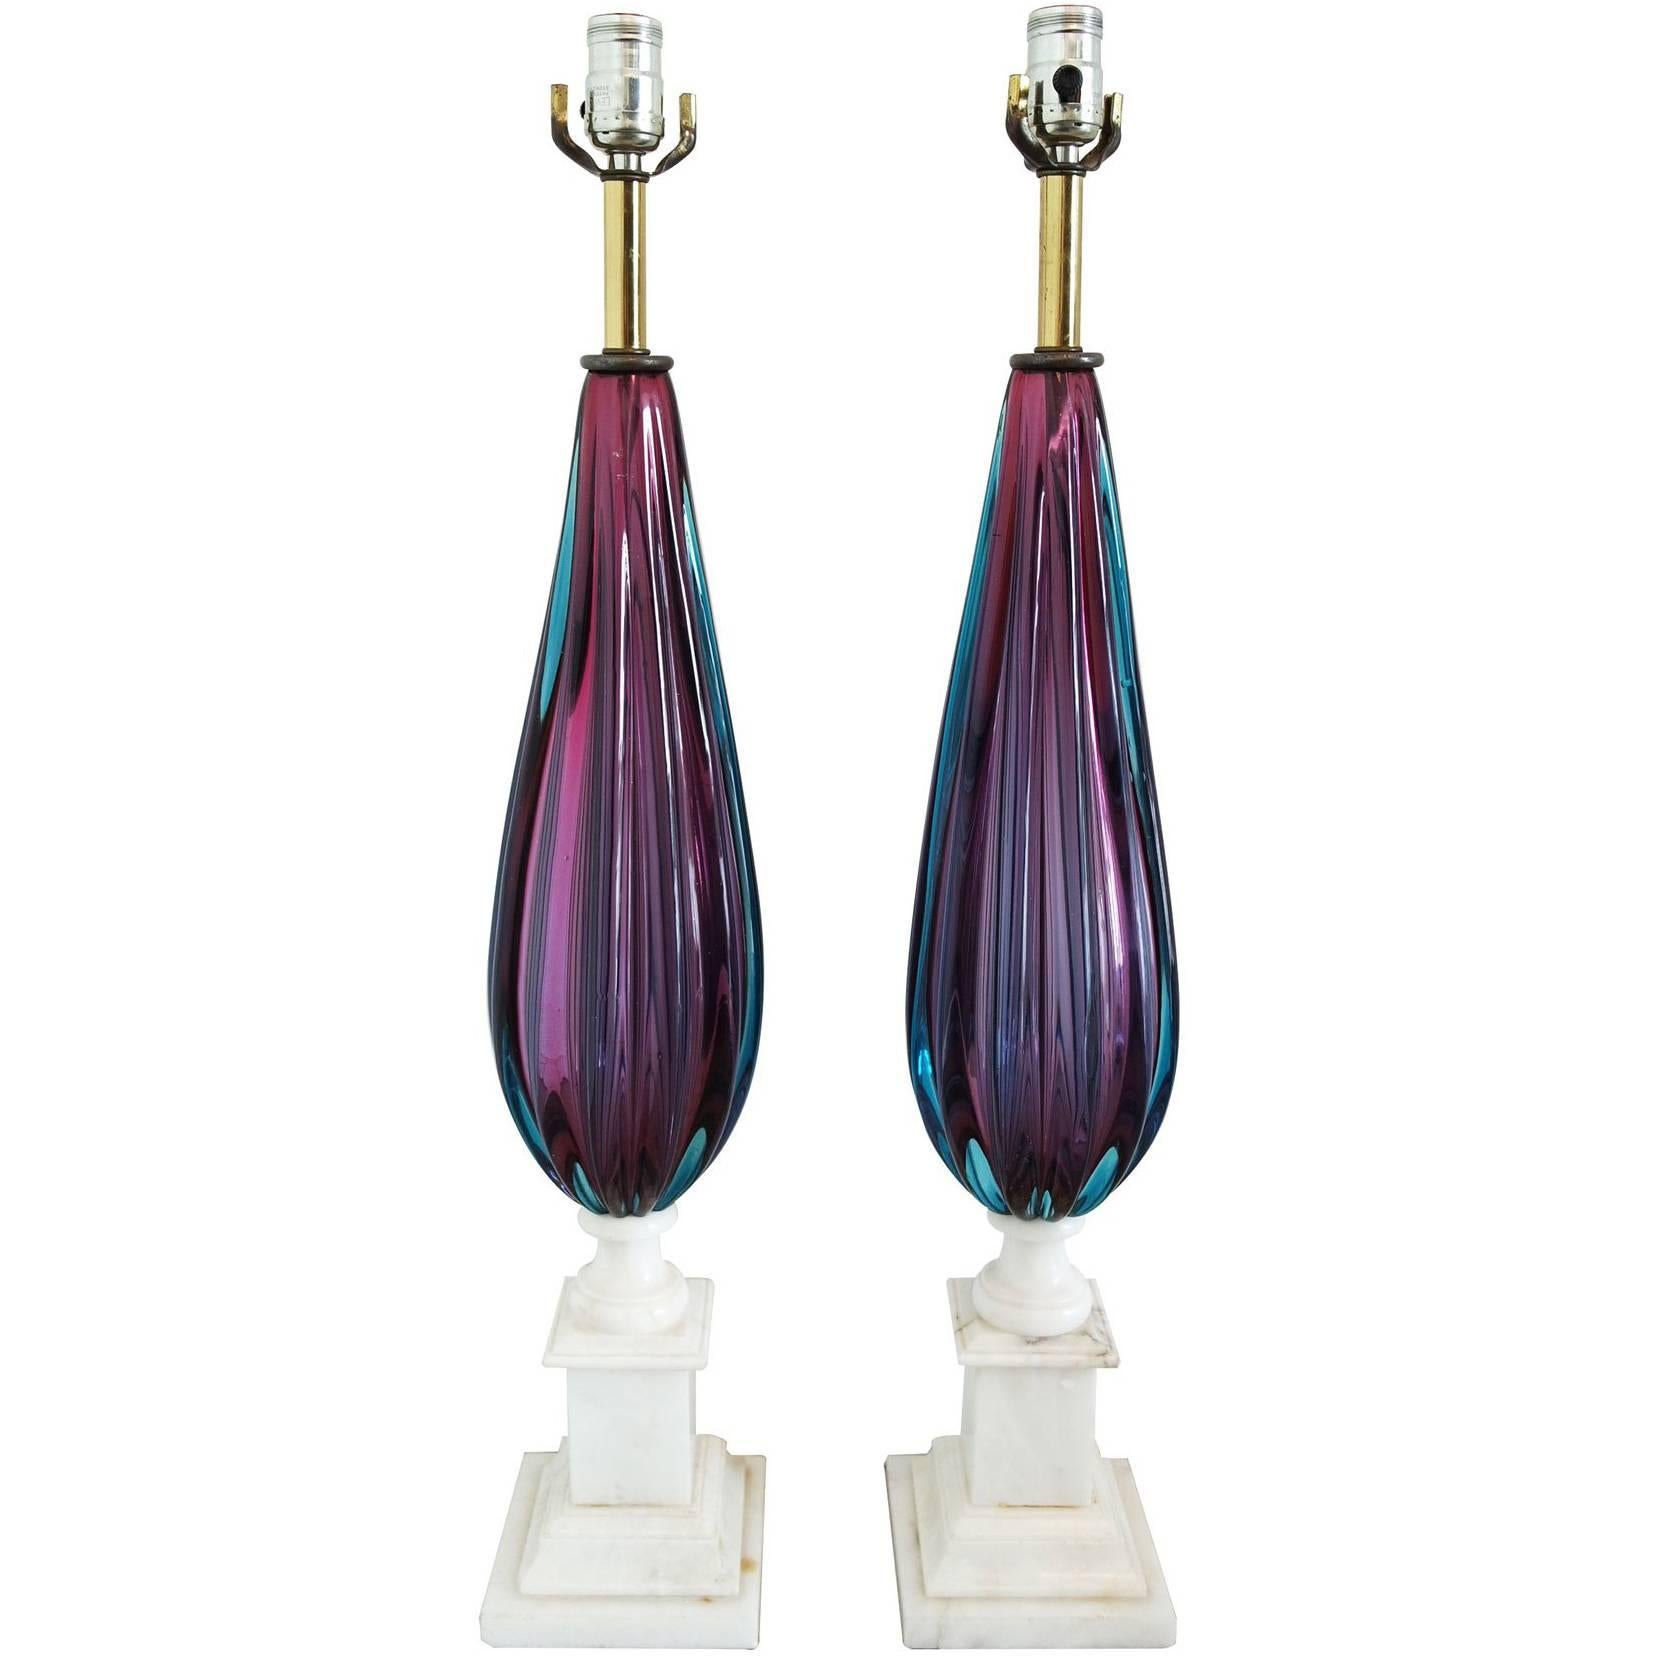 Pair of Purple and Teal Murano Glass Lamps on White Marble Bases For Sale